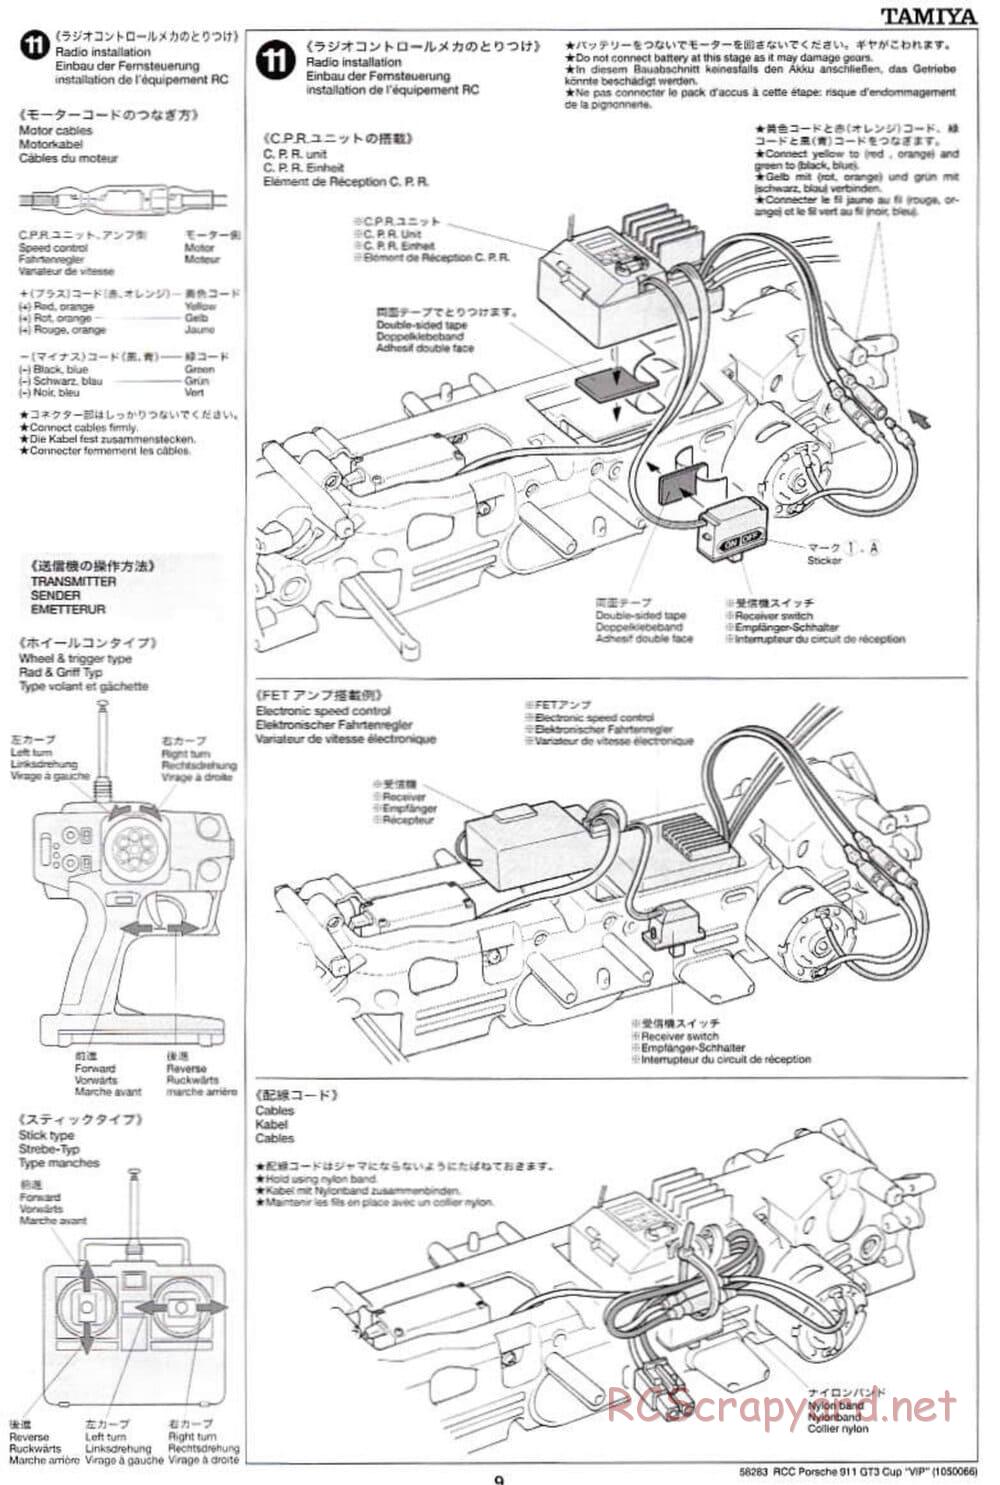 Tamiya - Porsche 911 GT3 Cup VIP - TL-01 Chassis - Manual - Page 9